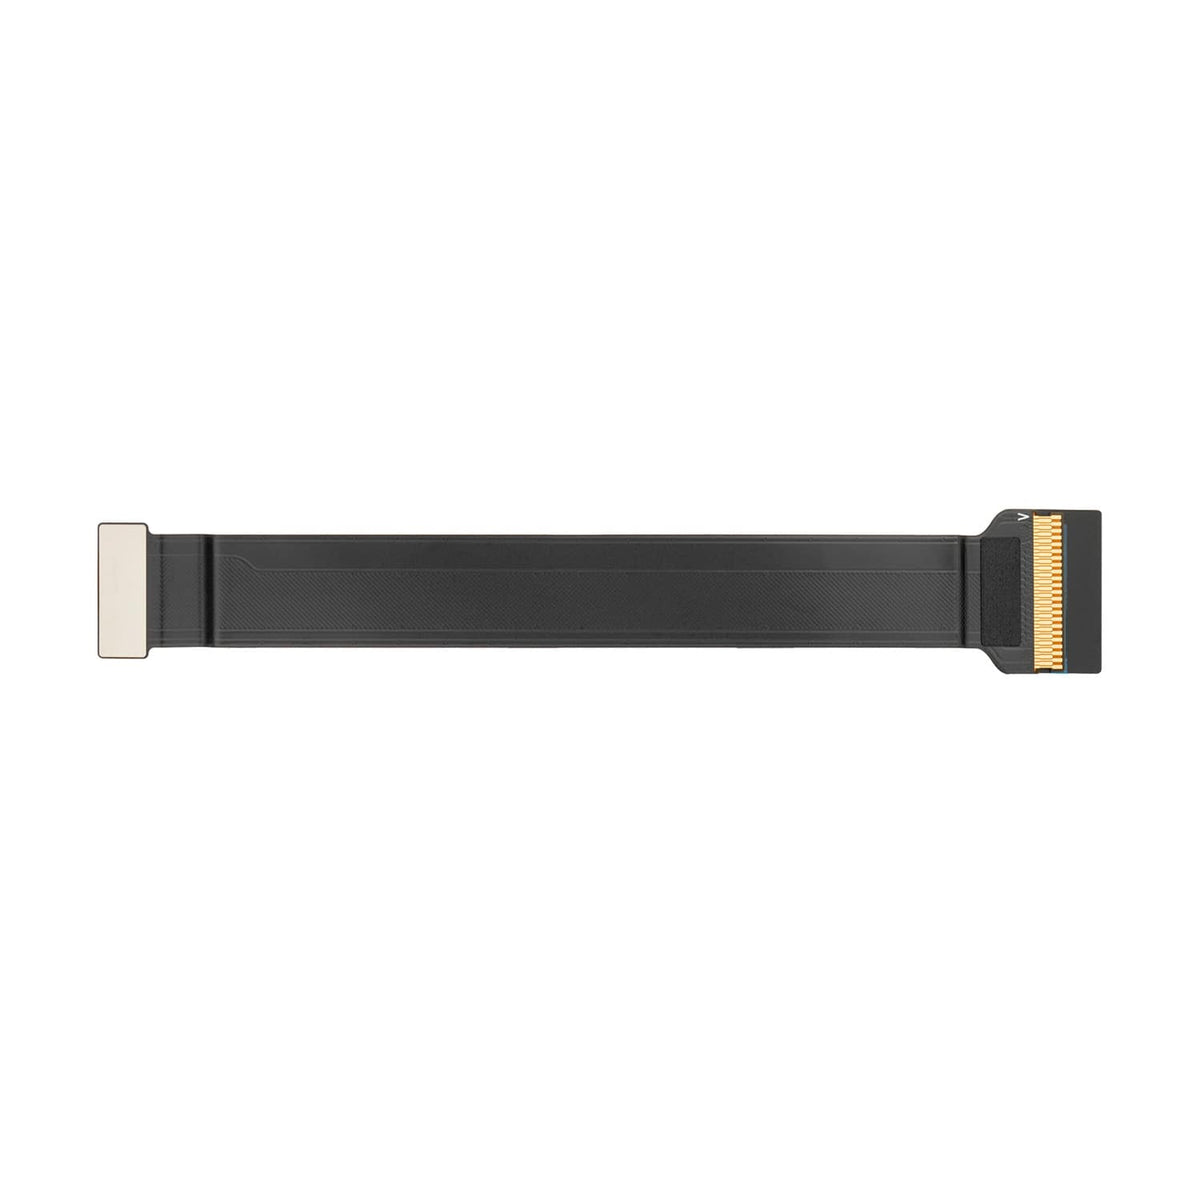 AUDIO FLEX CABLE FOR MACBOOK AIR 13" M1 A2337 (LATE 2020)